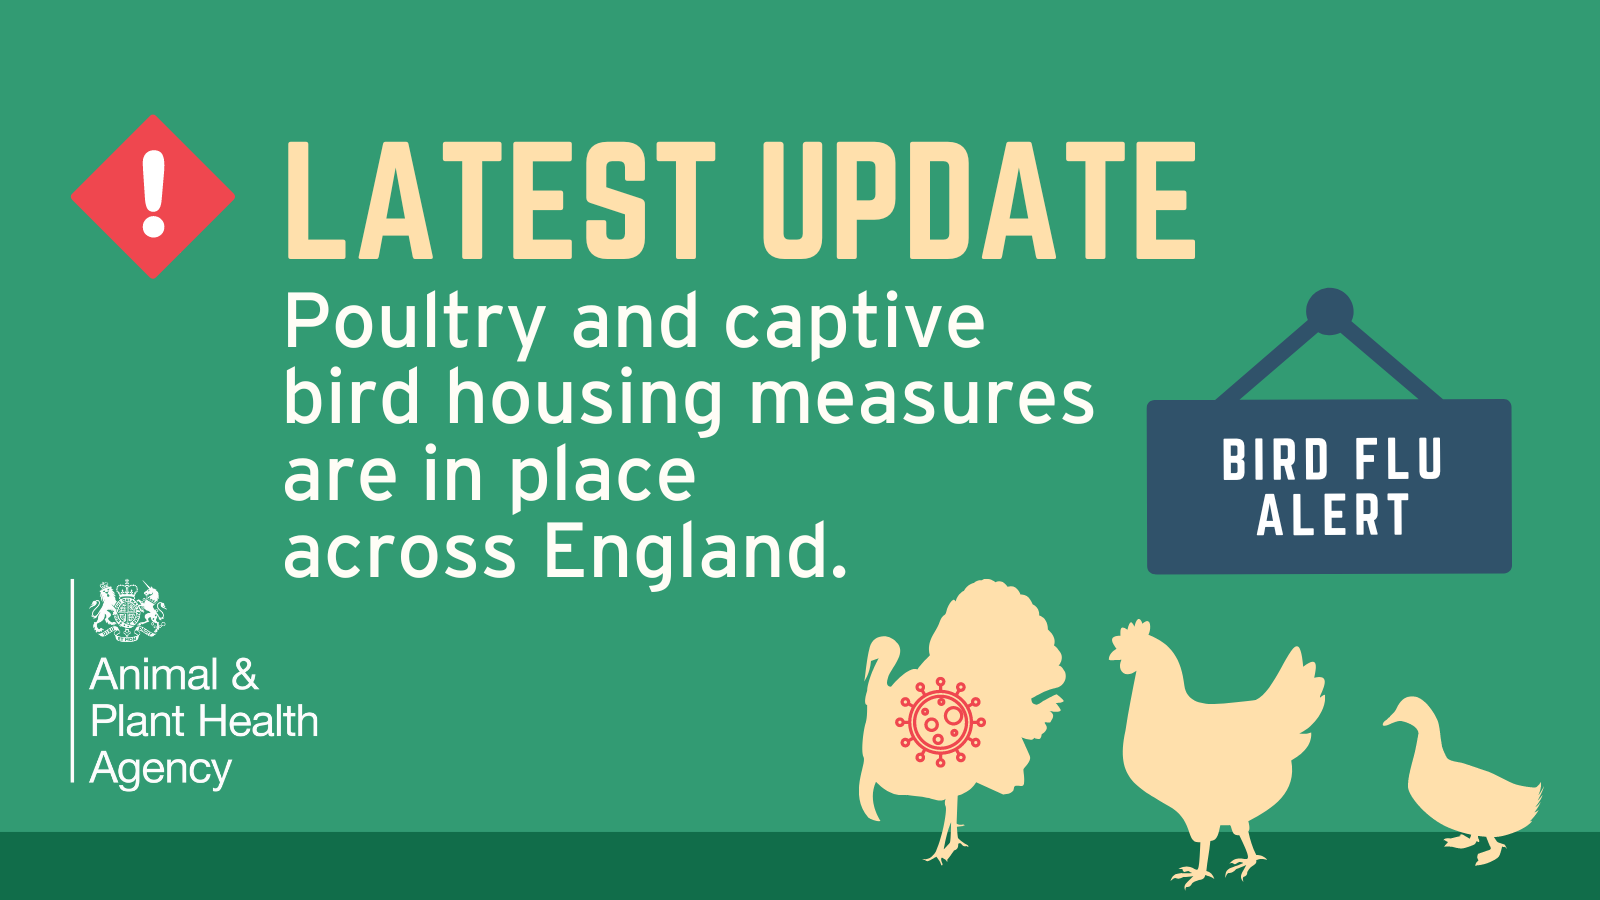 Avian Flu update poultry and captive bird housing measures are now in place